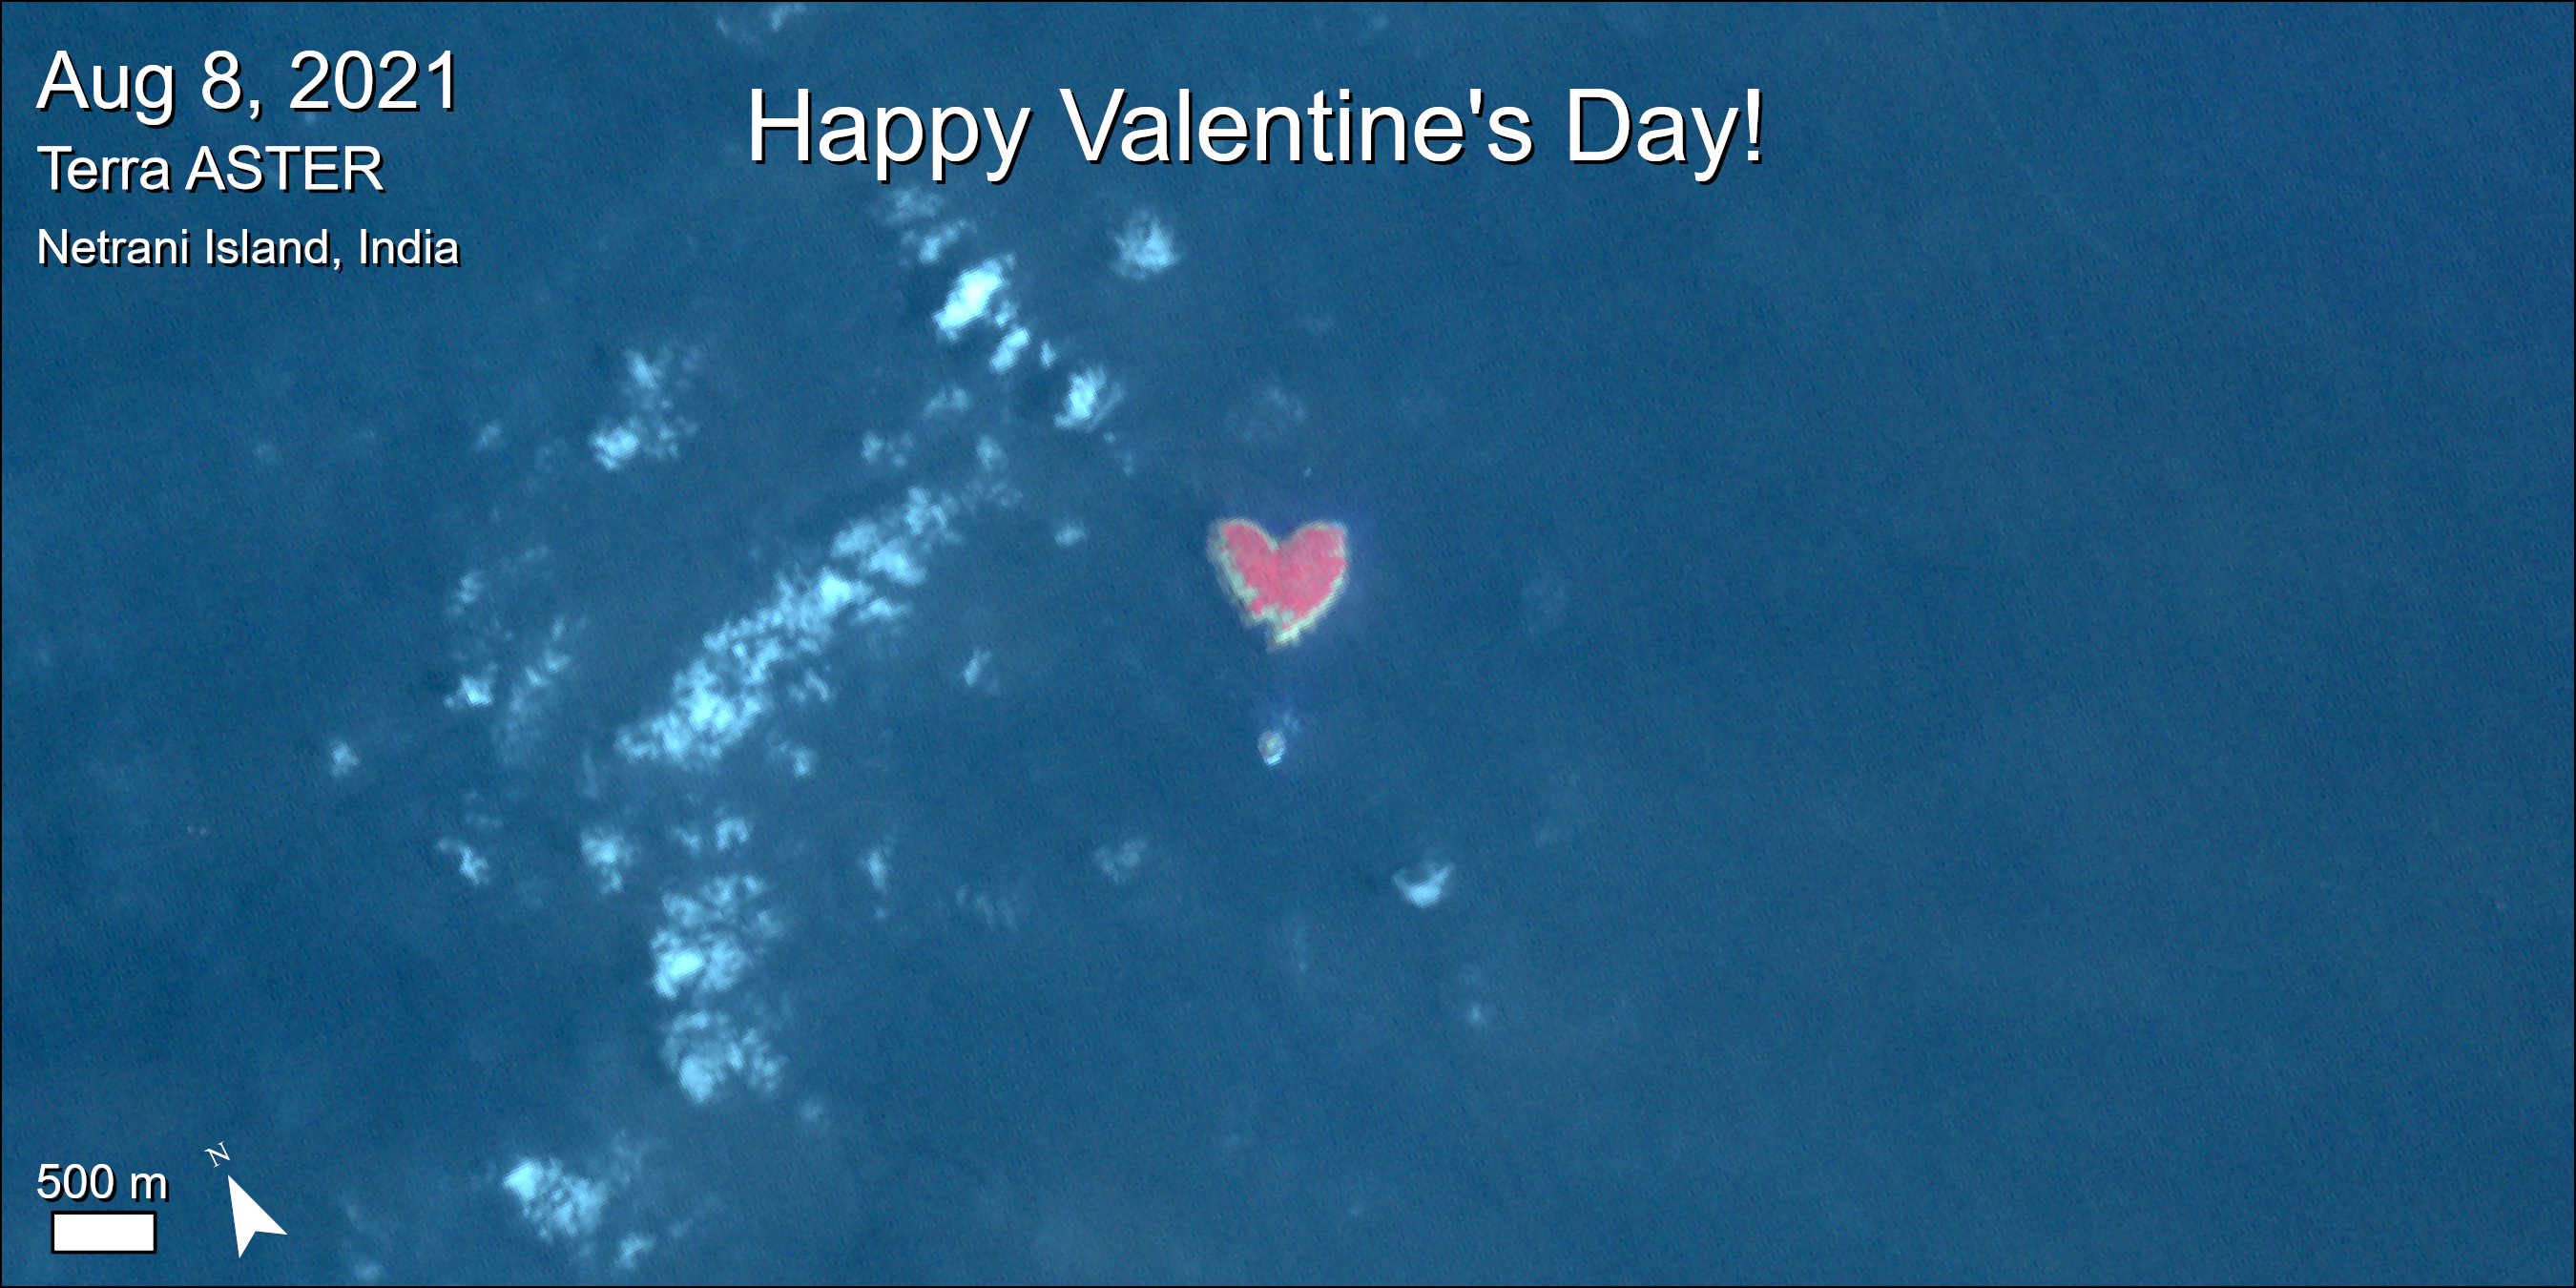 A heart shaped island, text on screen reads Aug 8, 2021 Terra ASTER Netrani Island, India, 500 meter scale bar, north arrow, Happy Valentine's Day!